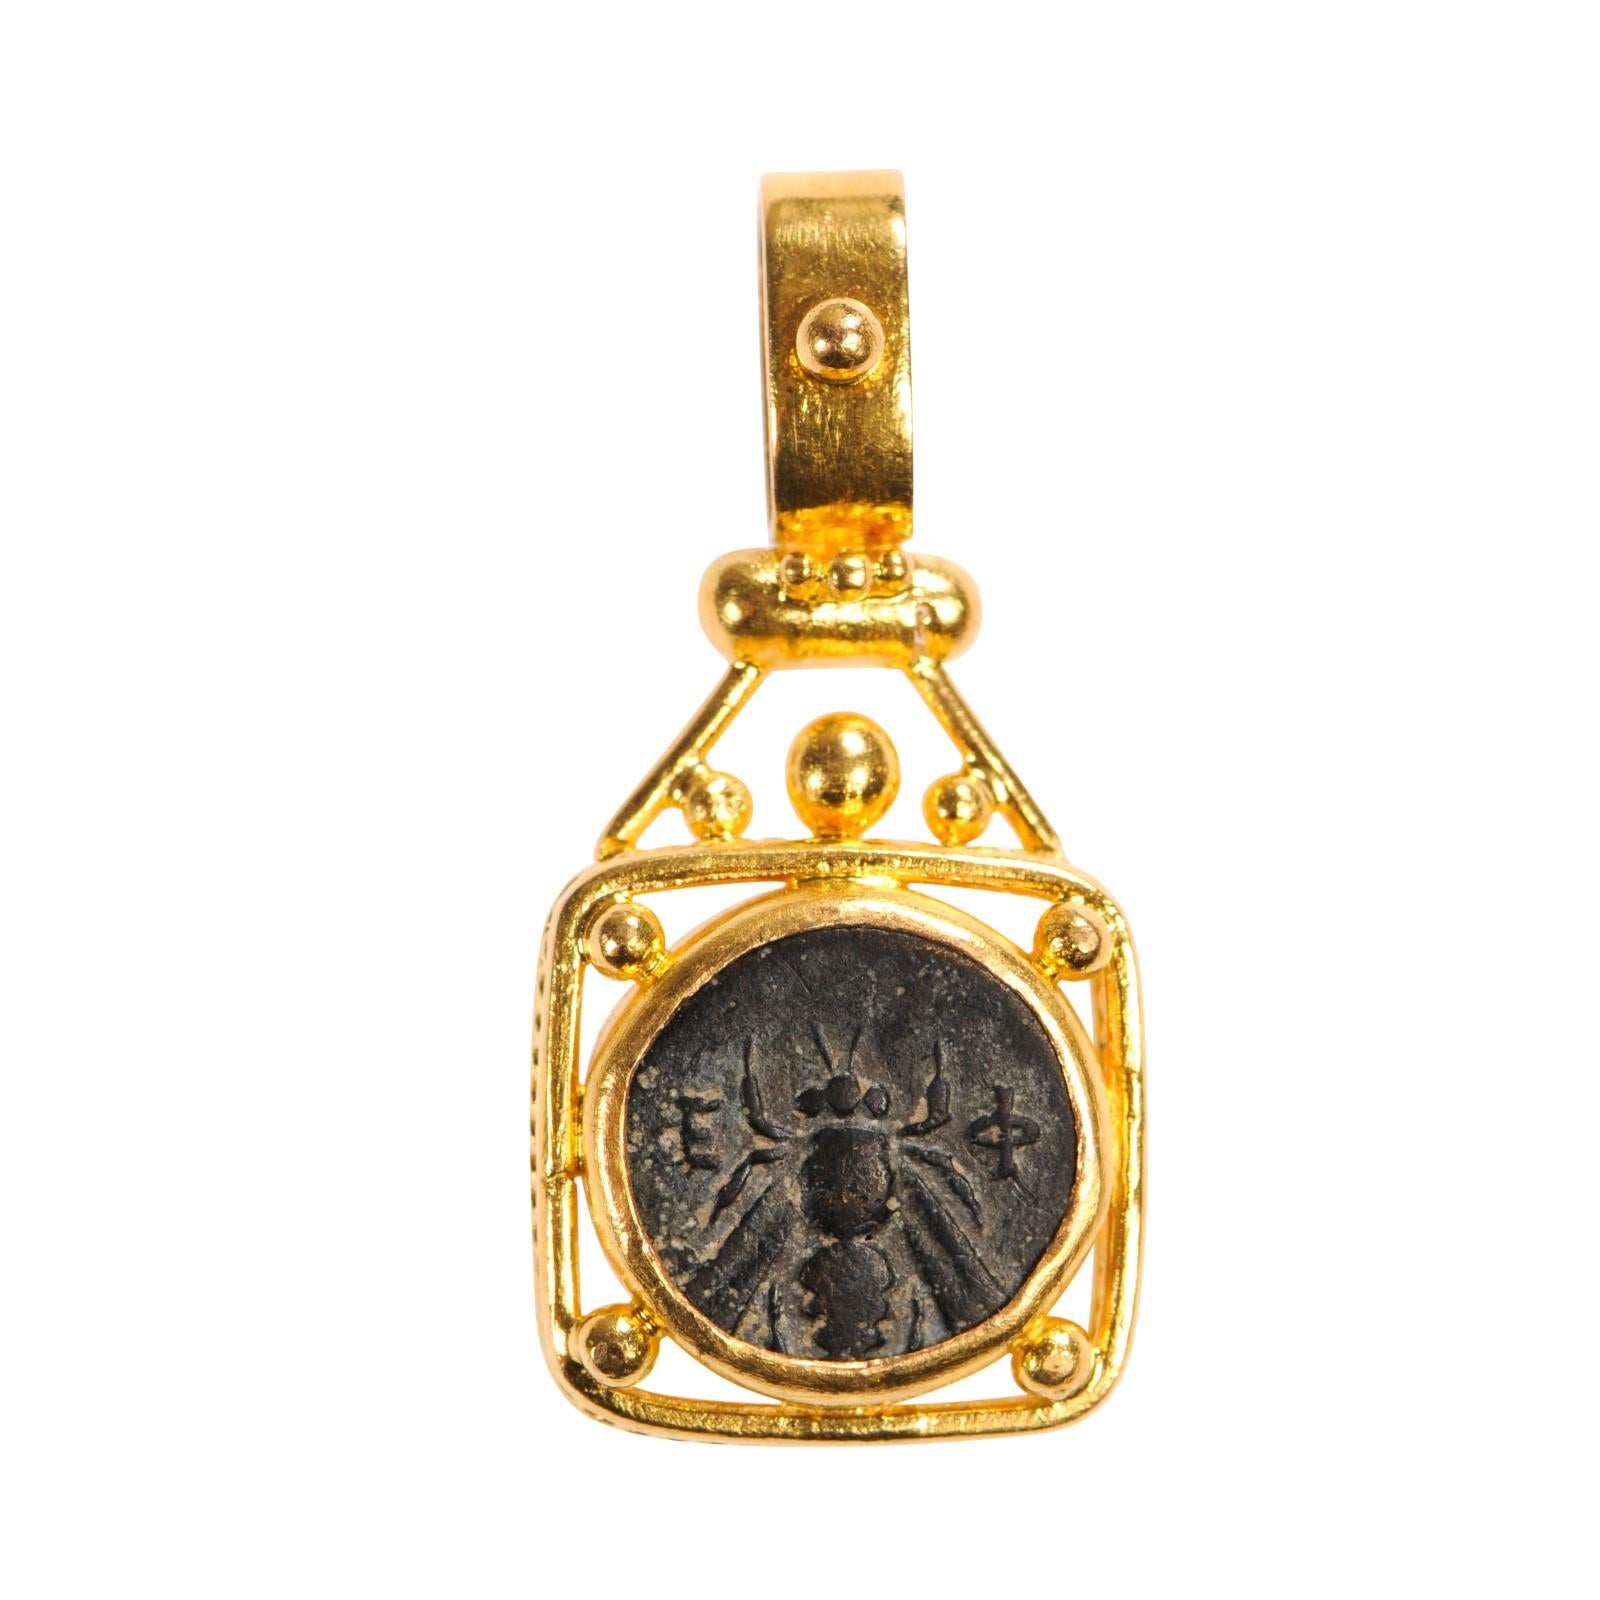 An Authentic Greek Bronze Coin, circa 350 - 300 BC, obverse (front) is a bee with a kneeling stag on reverse, set in a 22k gold squared bezel. The coin pendant measures approximately 1 1/3